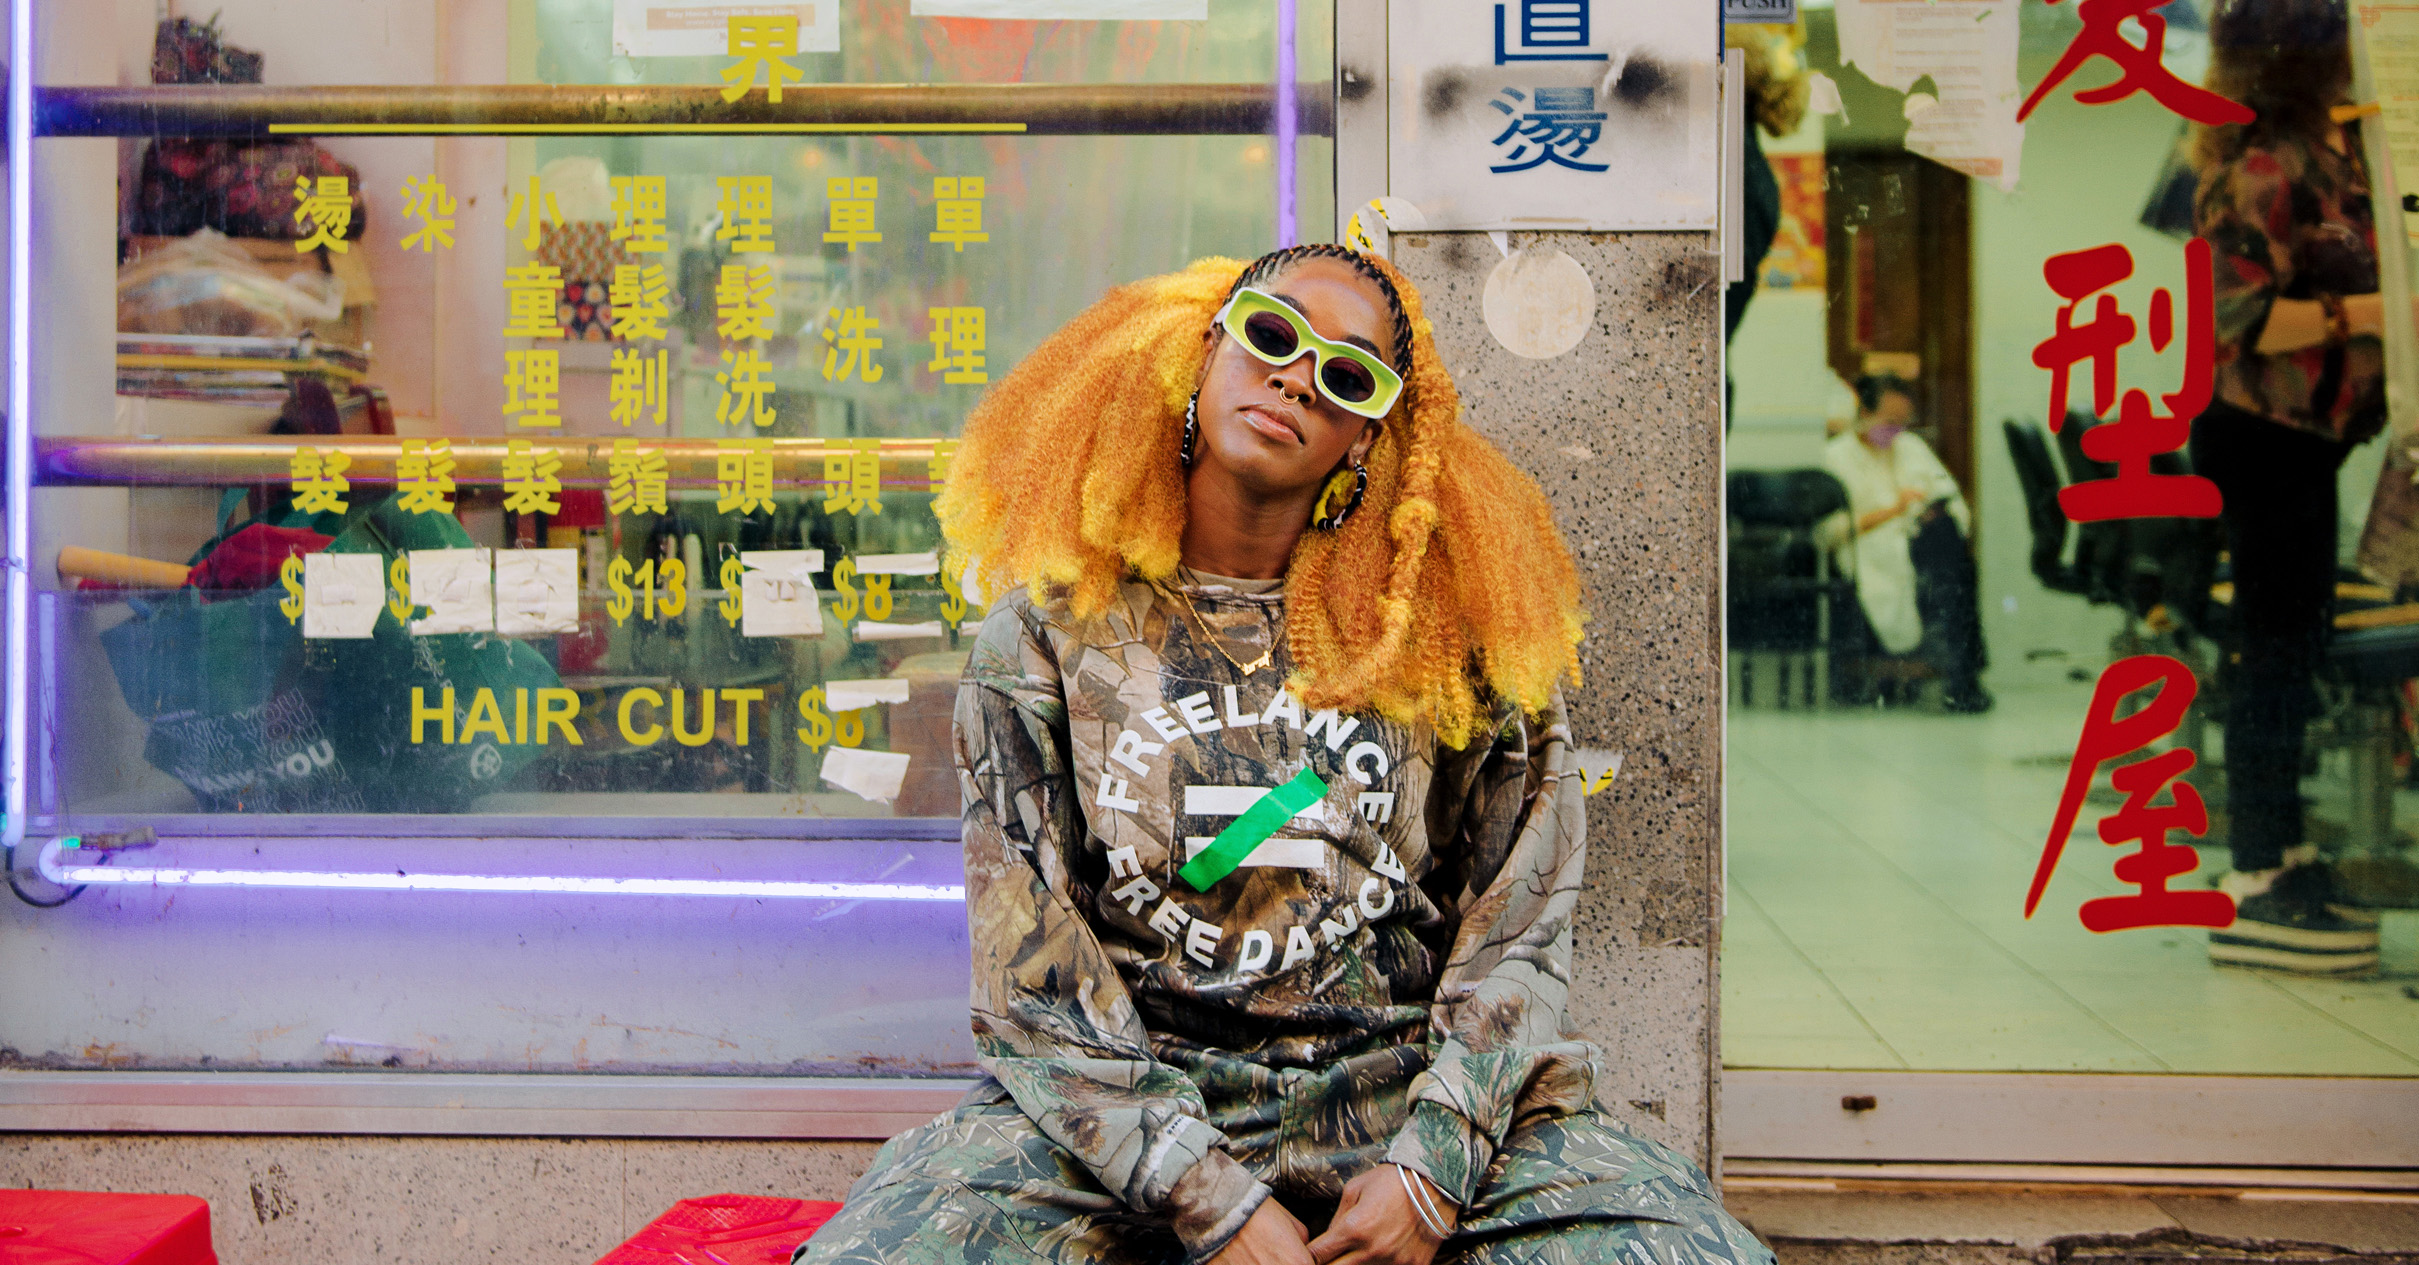 BRAT sits outside a shop in Chinatown, hands clasped between her splayed knees and head tilted to one side. Her eyes are hidden behind green sunglasses; her big, fluffy hair is a vibrant orange and reaches her shoulders.